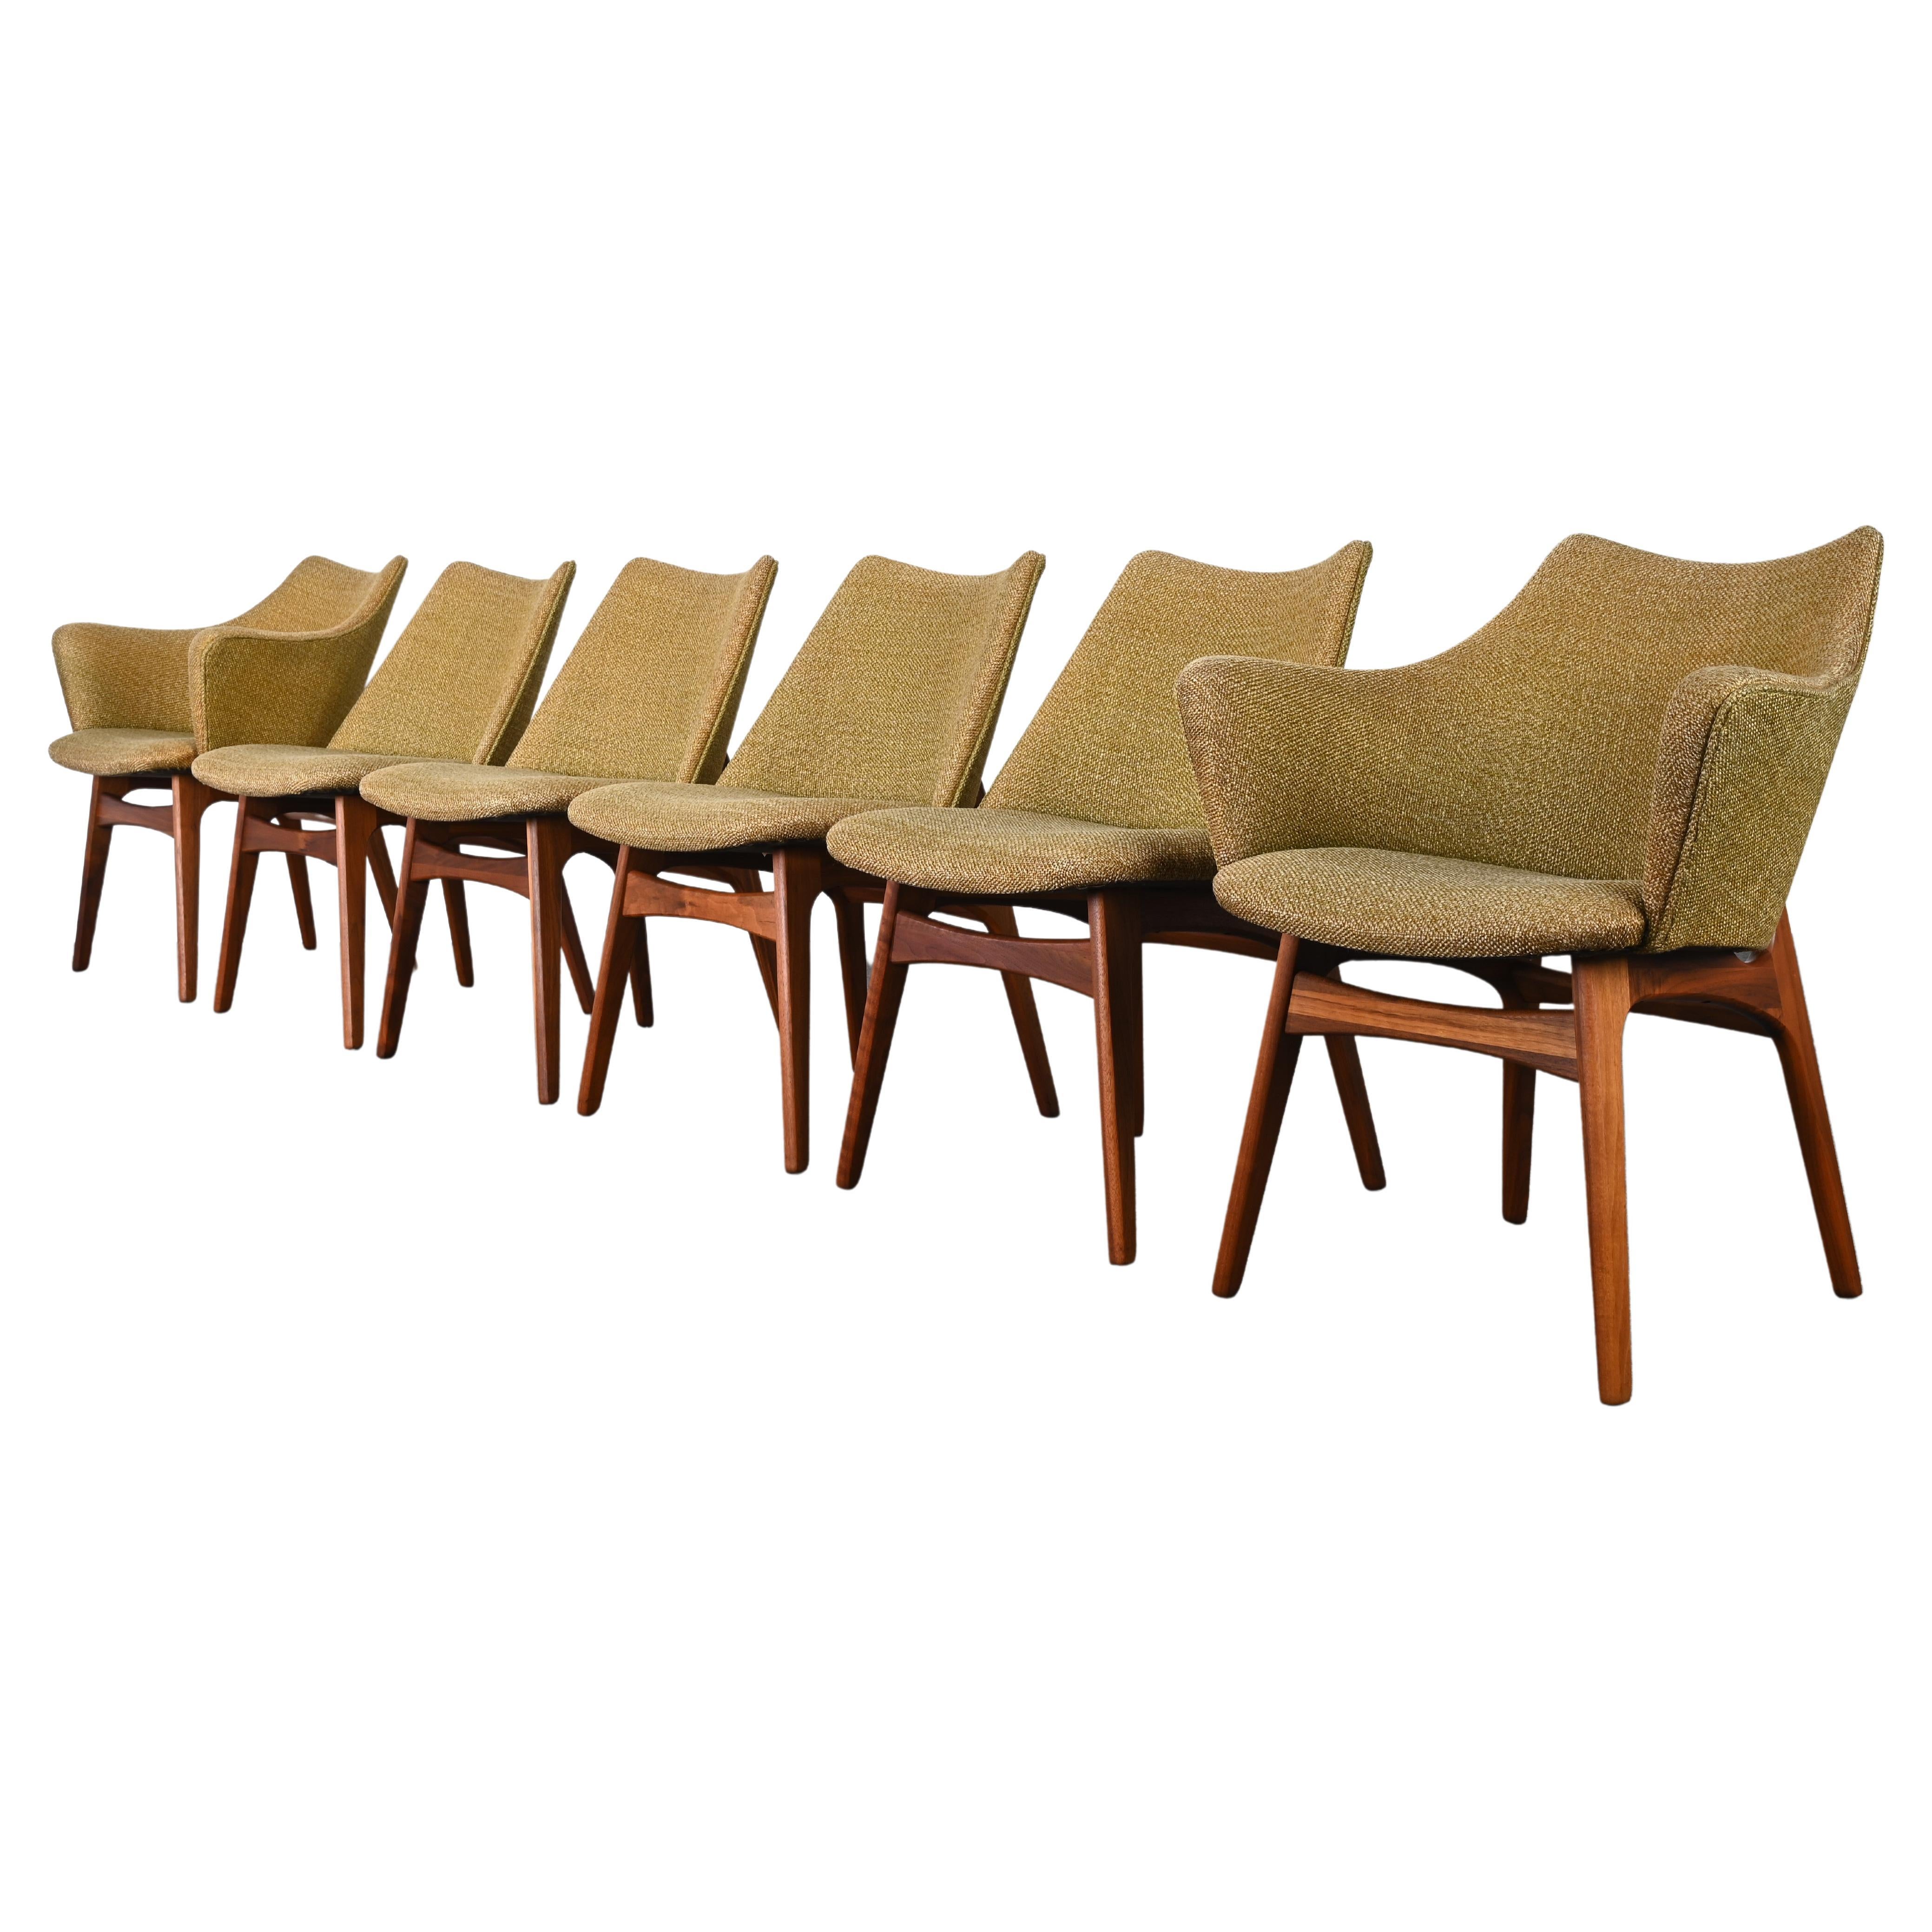 Set of Six Adrian Pearsall Dining Chairs Model 2418-C and 2416-C, 1960s